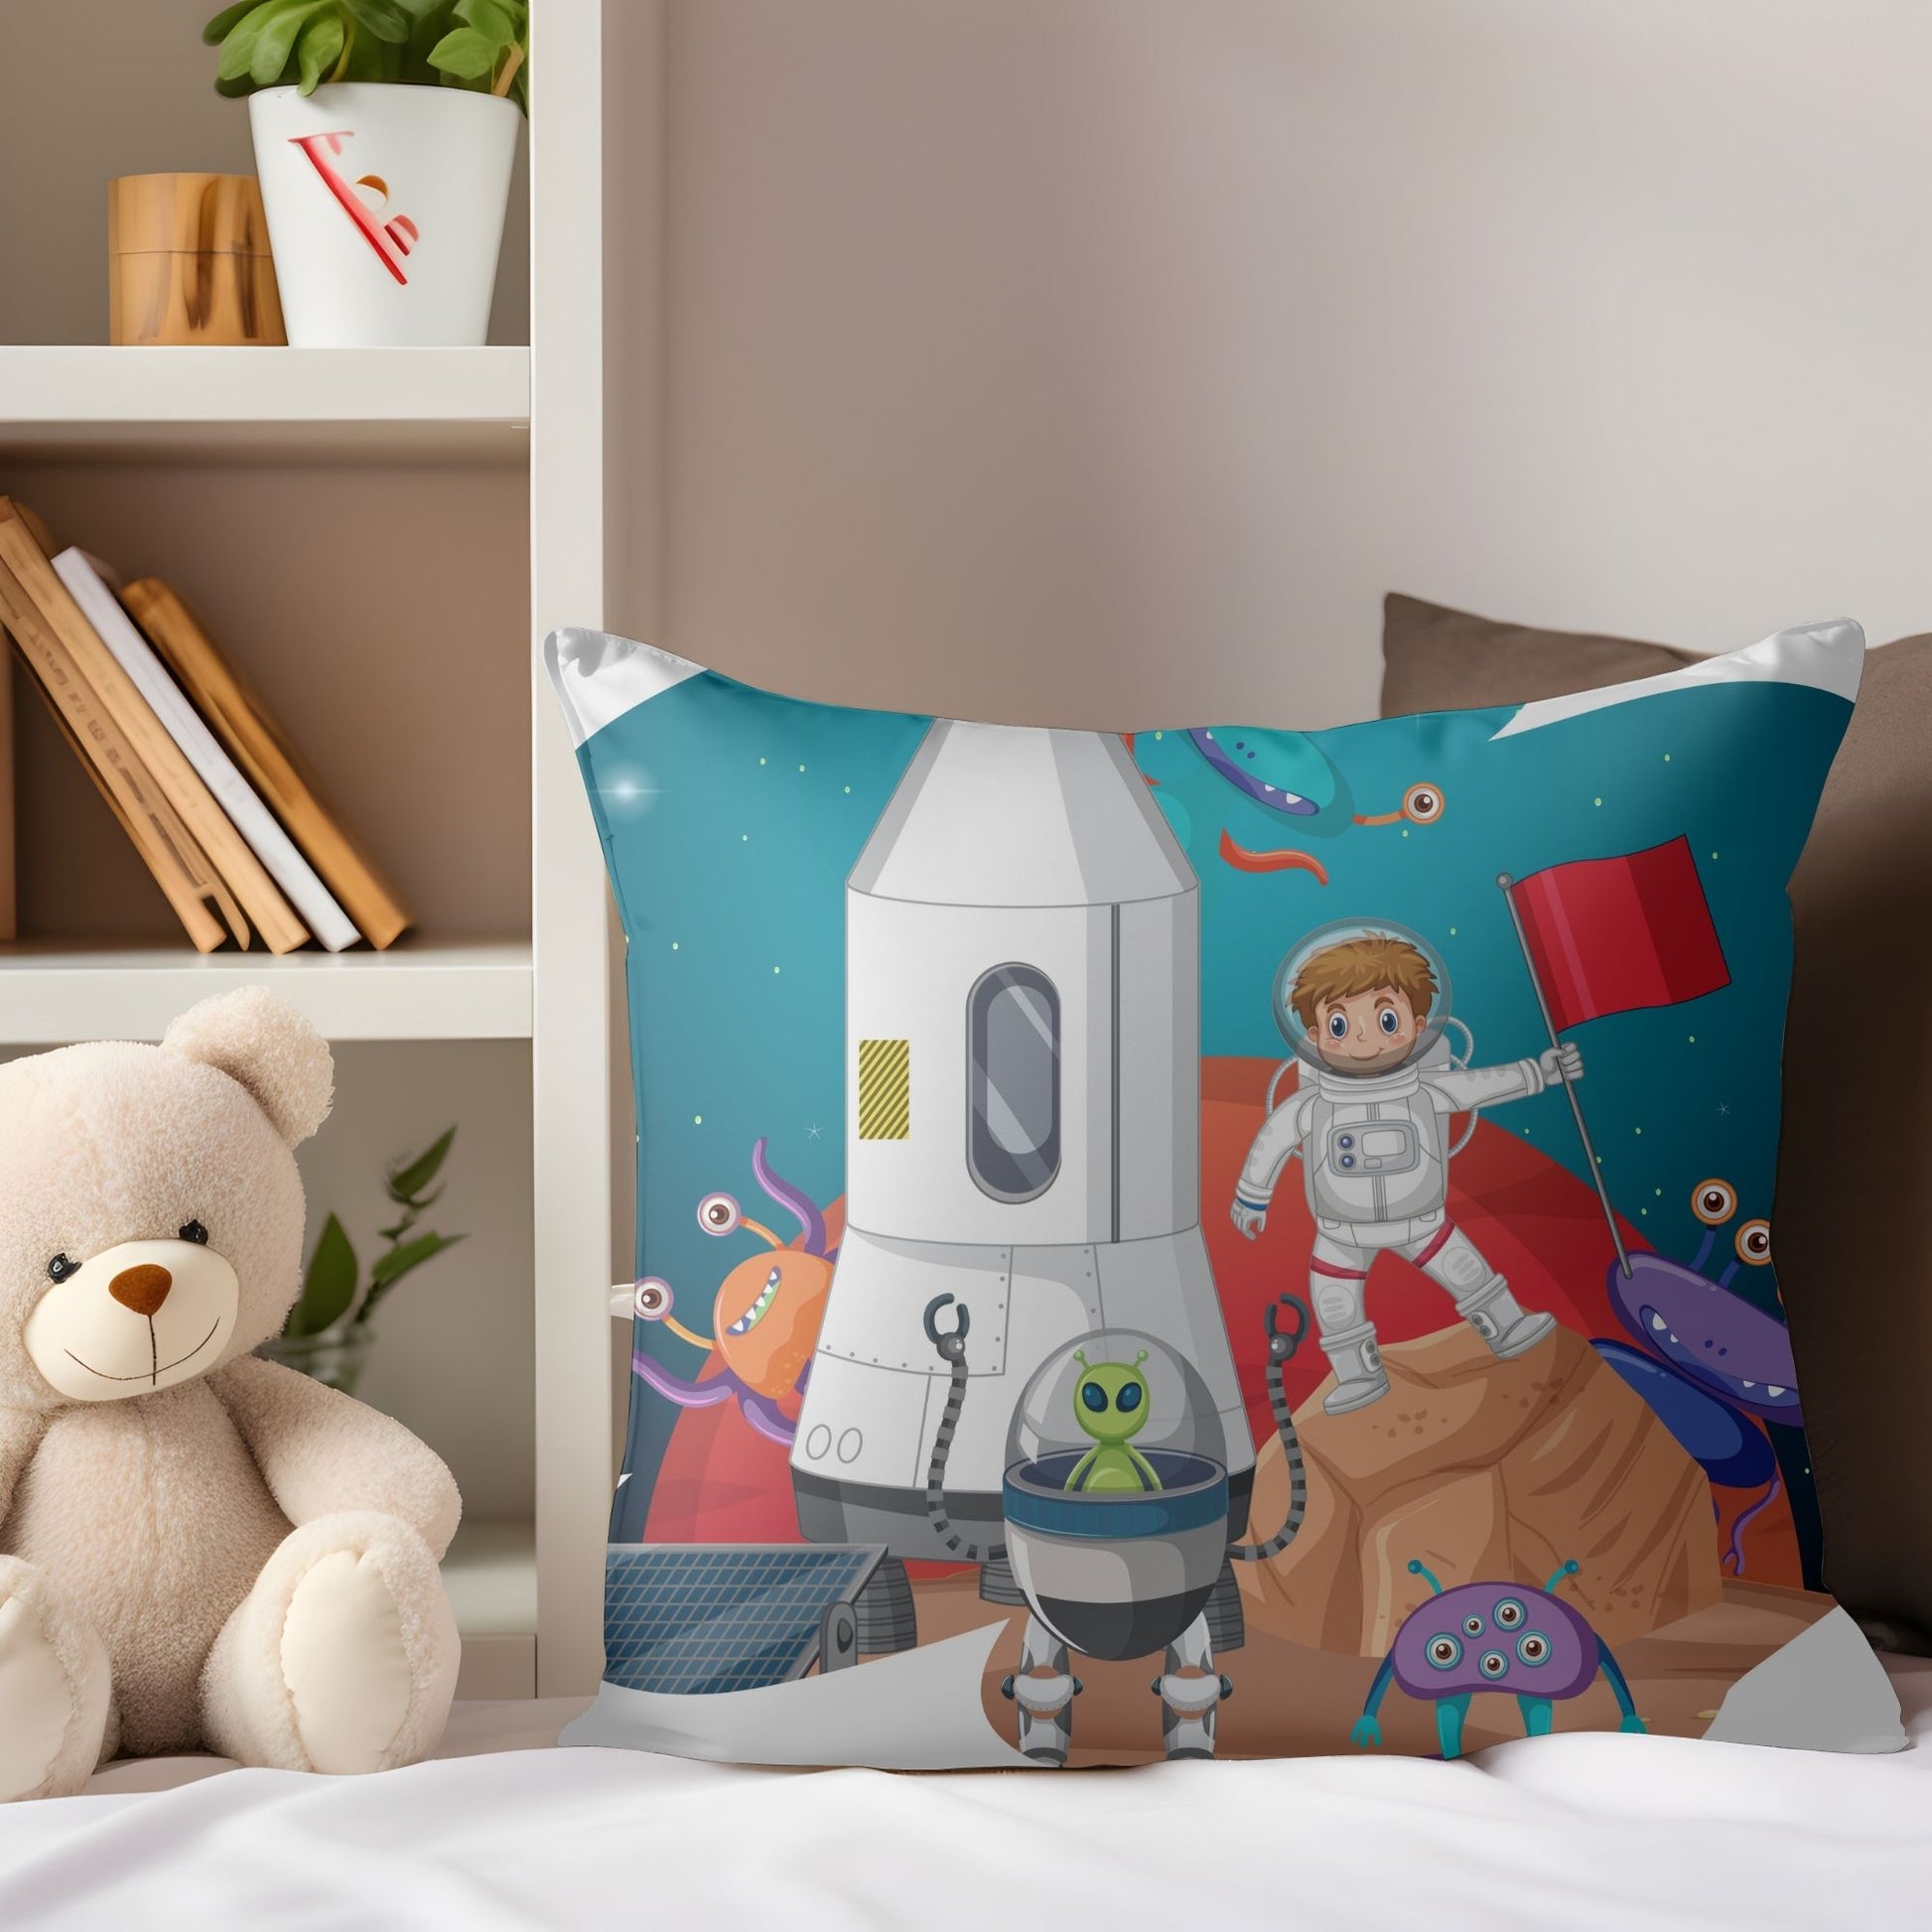 Soft pillow adorned with a young astronaut embarking on a space mission for children's rooms.